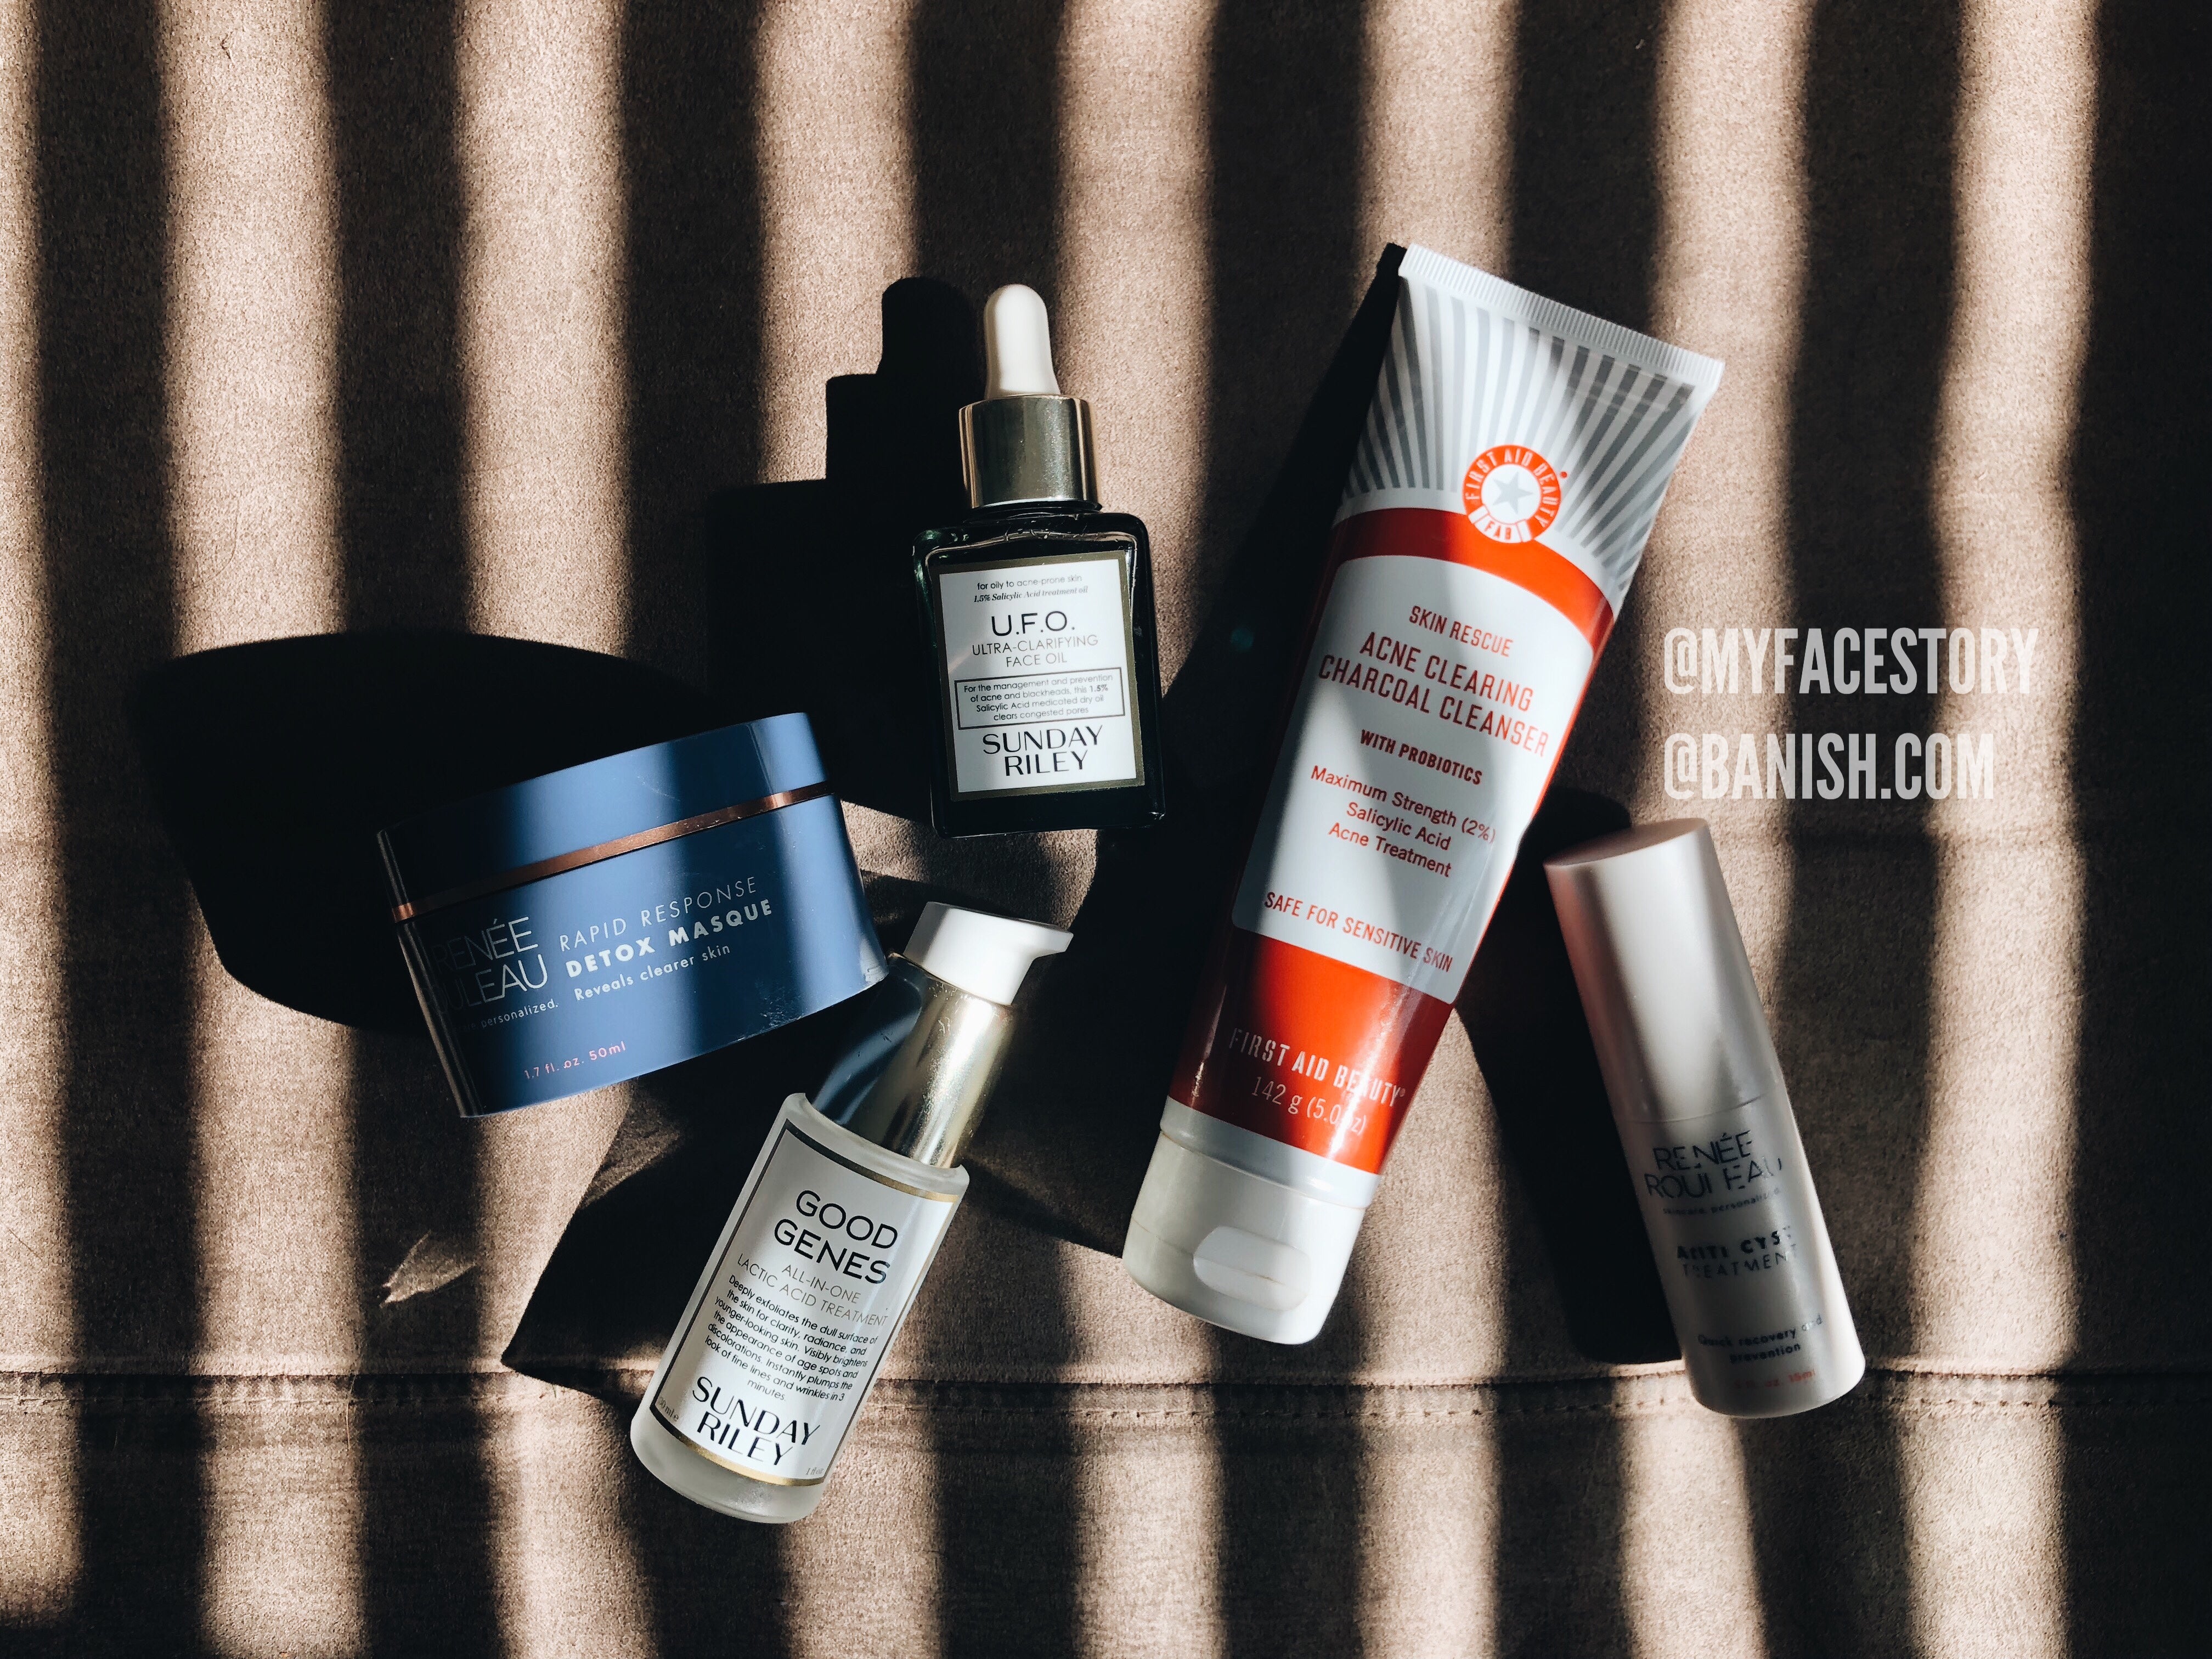 Top 5 Best Products for Cystic Acne